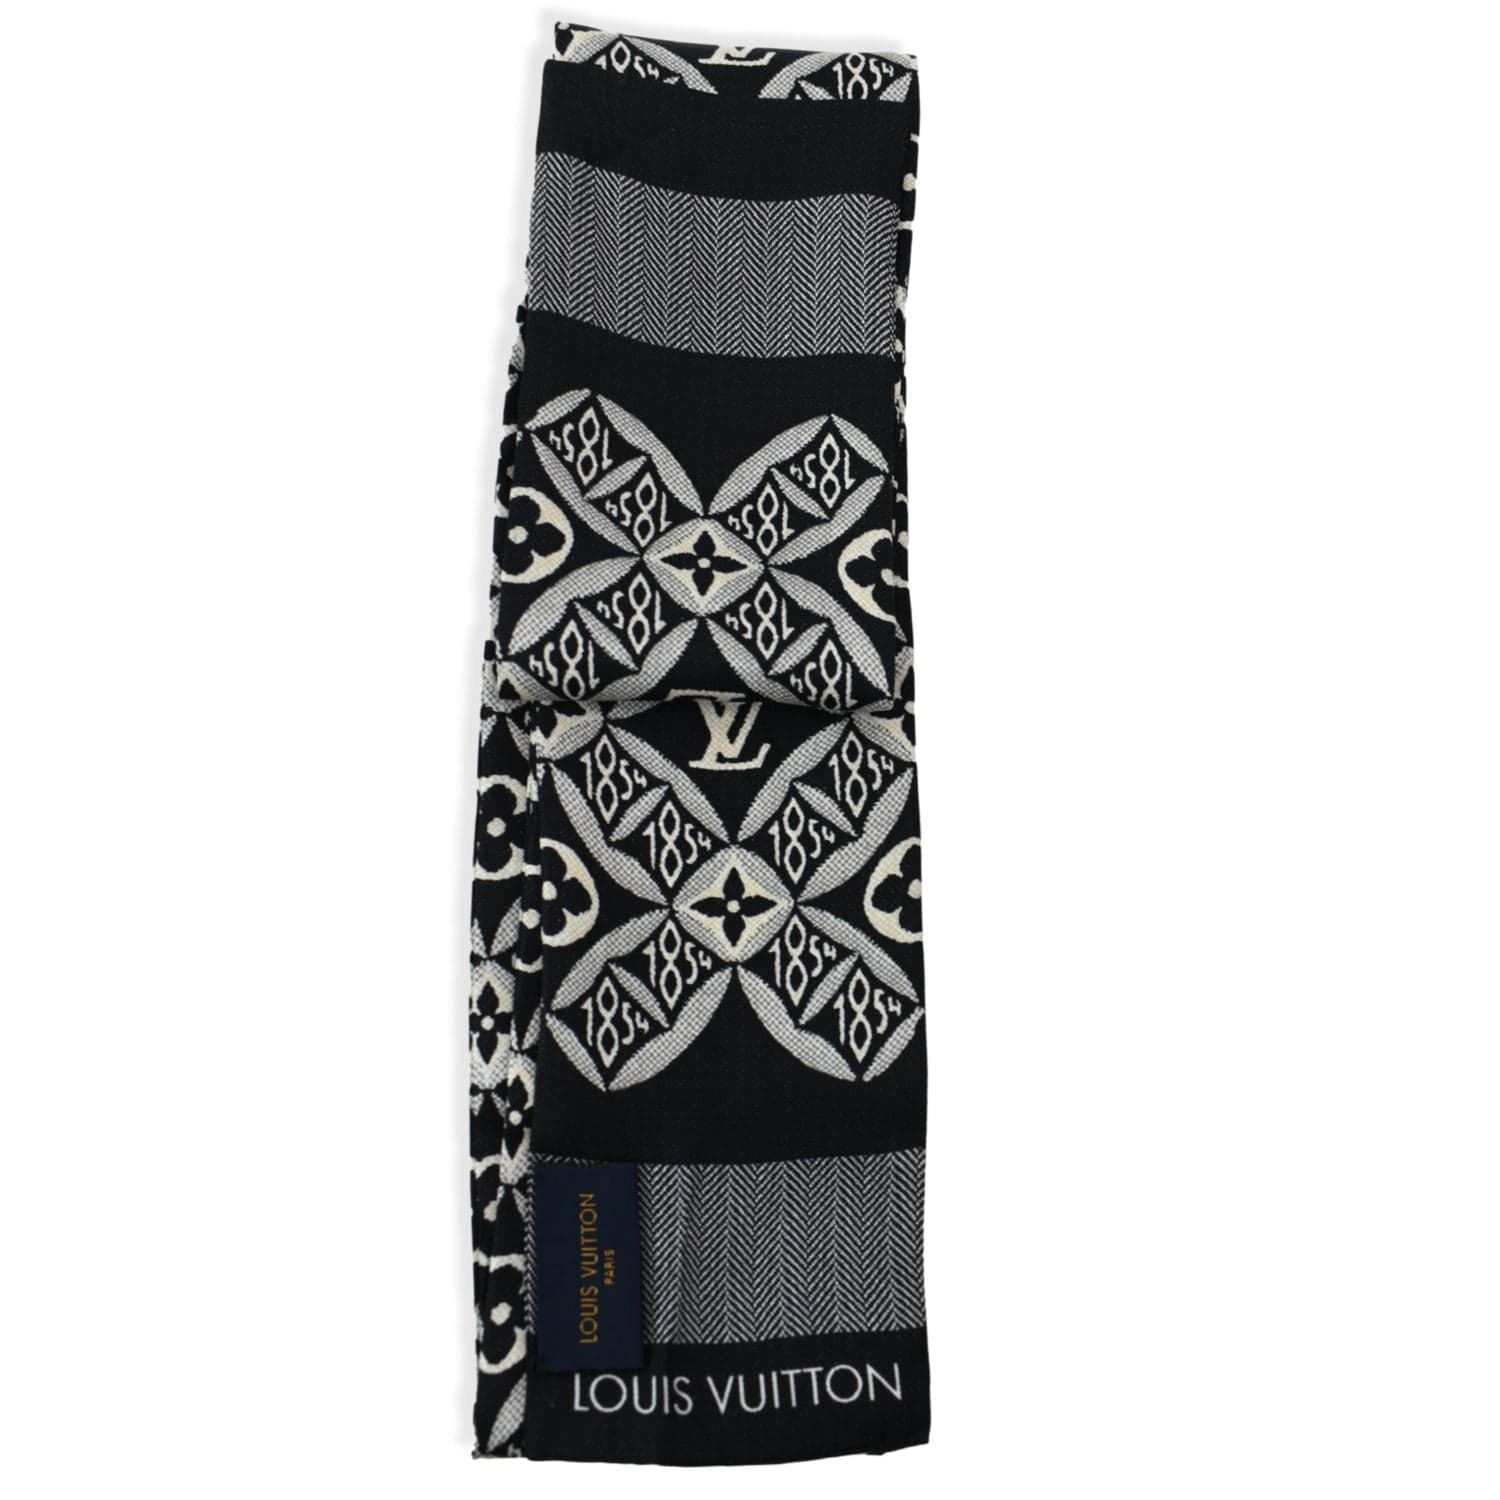 Currently loving this Louis Vuitton Bandeau scarf🖤🤍 I style it